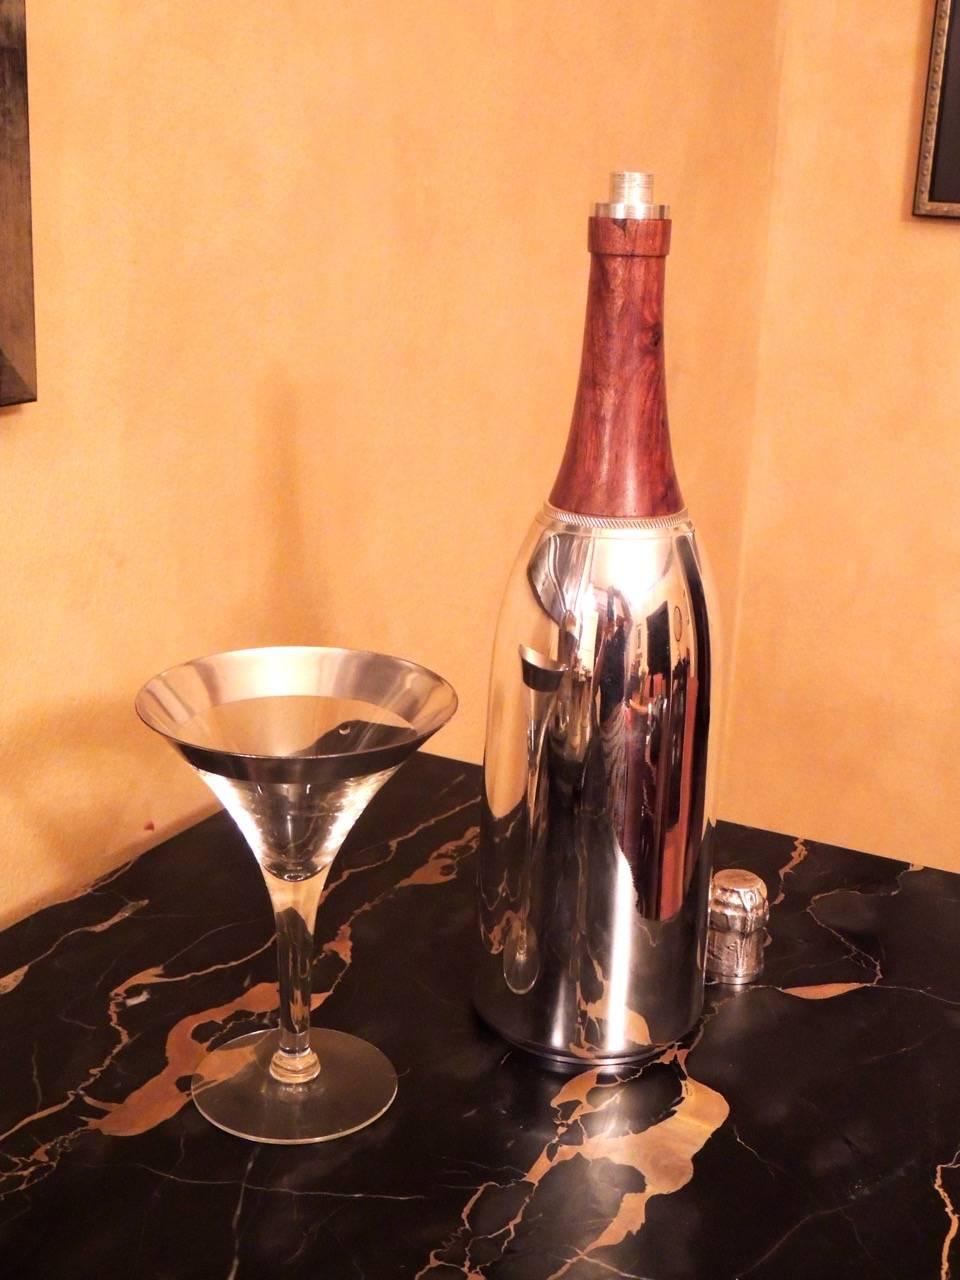 A uniquely designed silver plated champagne shaped cocktail Shaker in perfect condition is a great addition to a Shaker collection with interesting and amusing figural motifs. It would also make a wonderful gift with a sense of celebration.

The